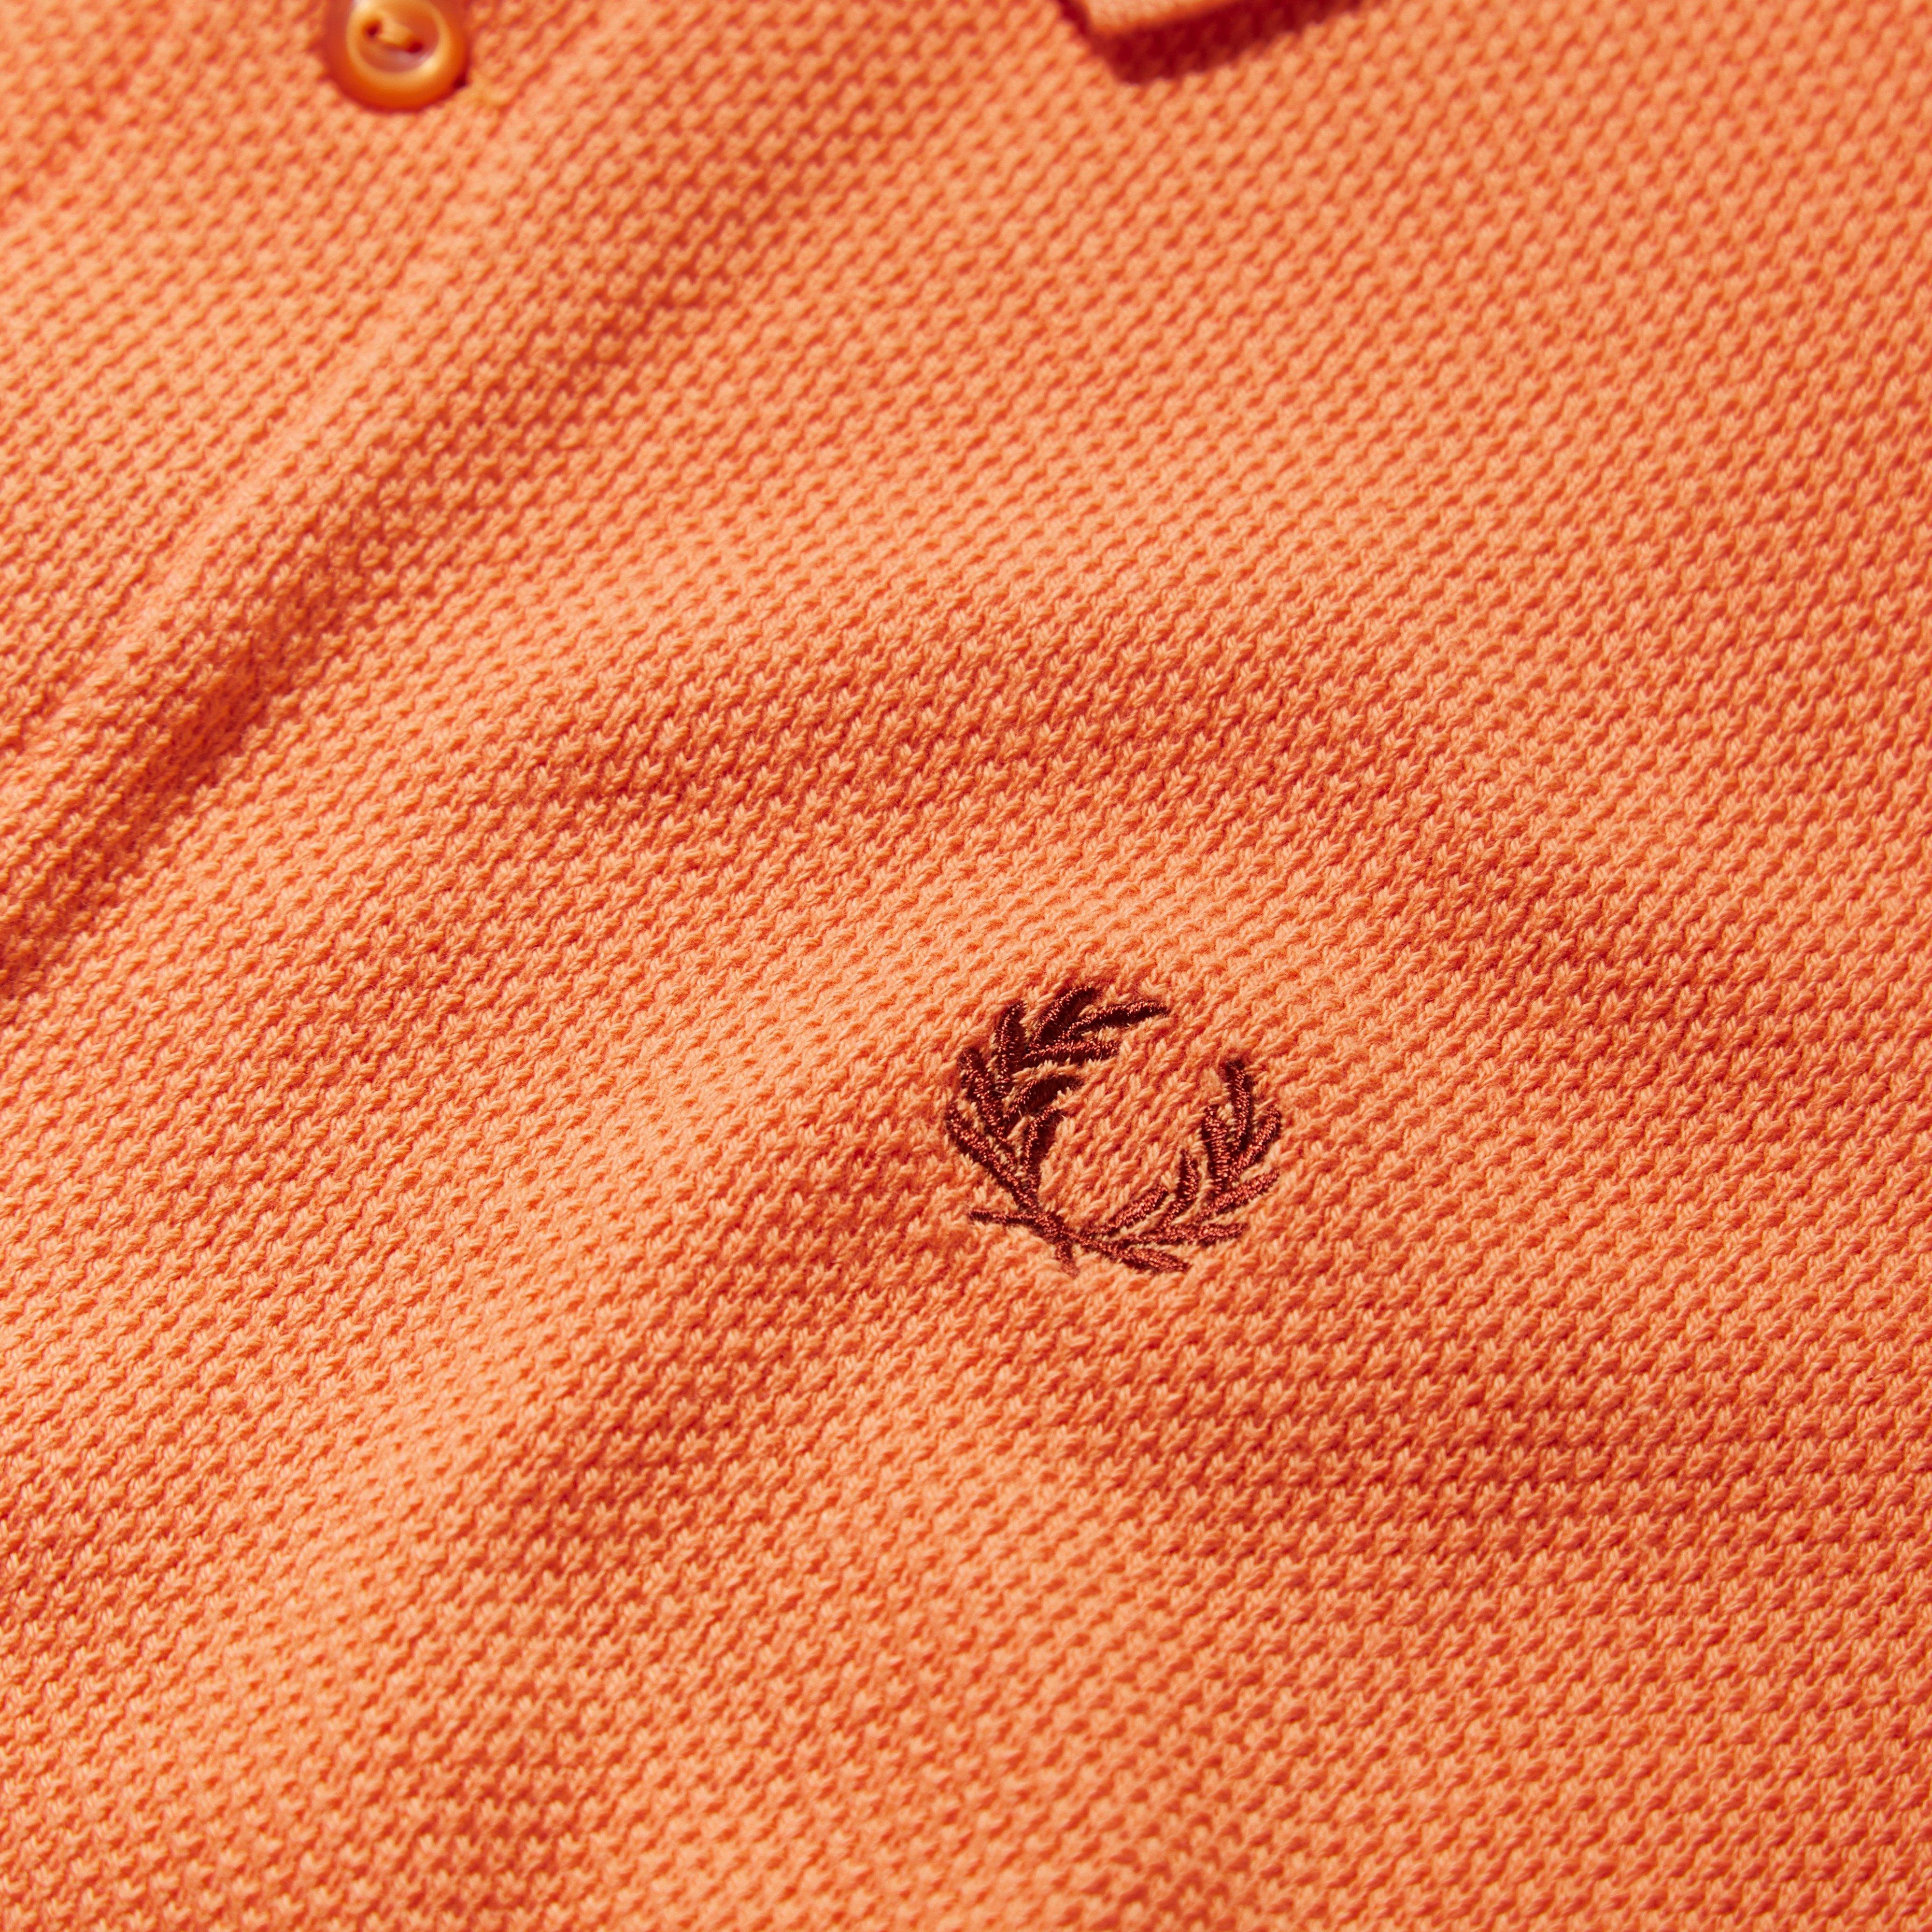 Fred Perry Pique Polo Shirt in Orange for Men - Lyst